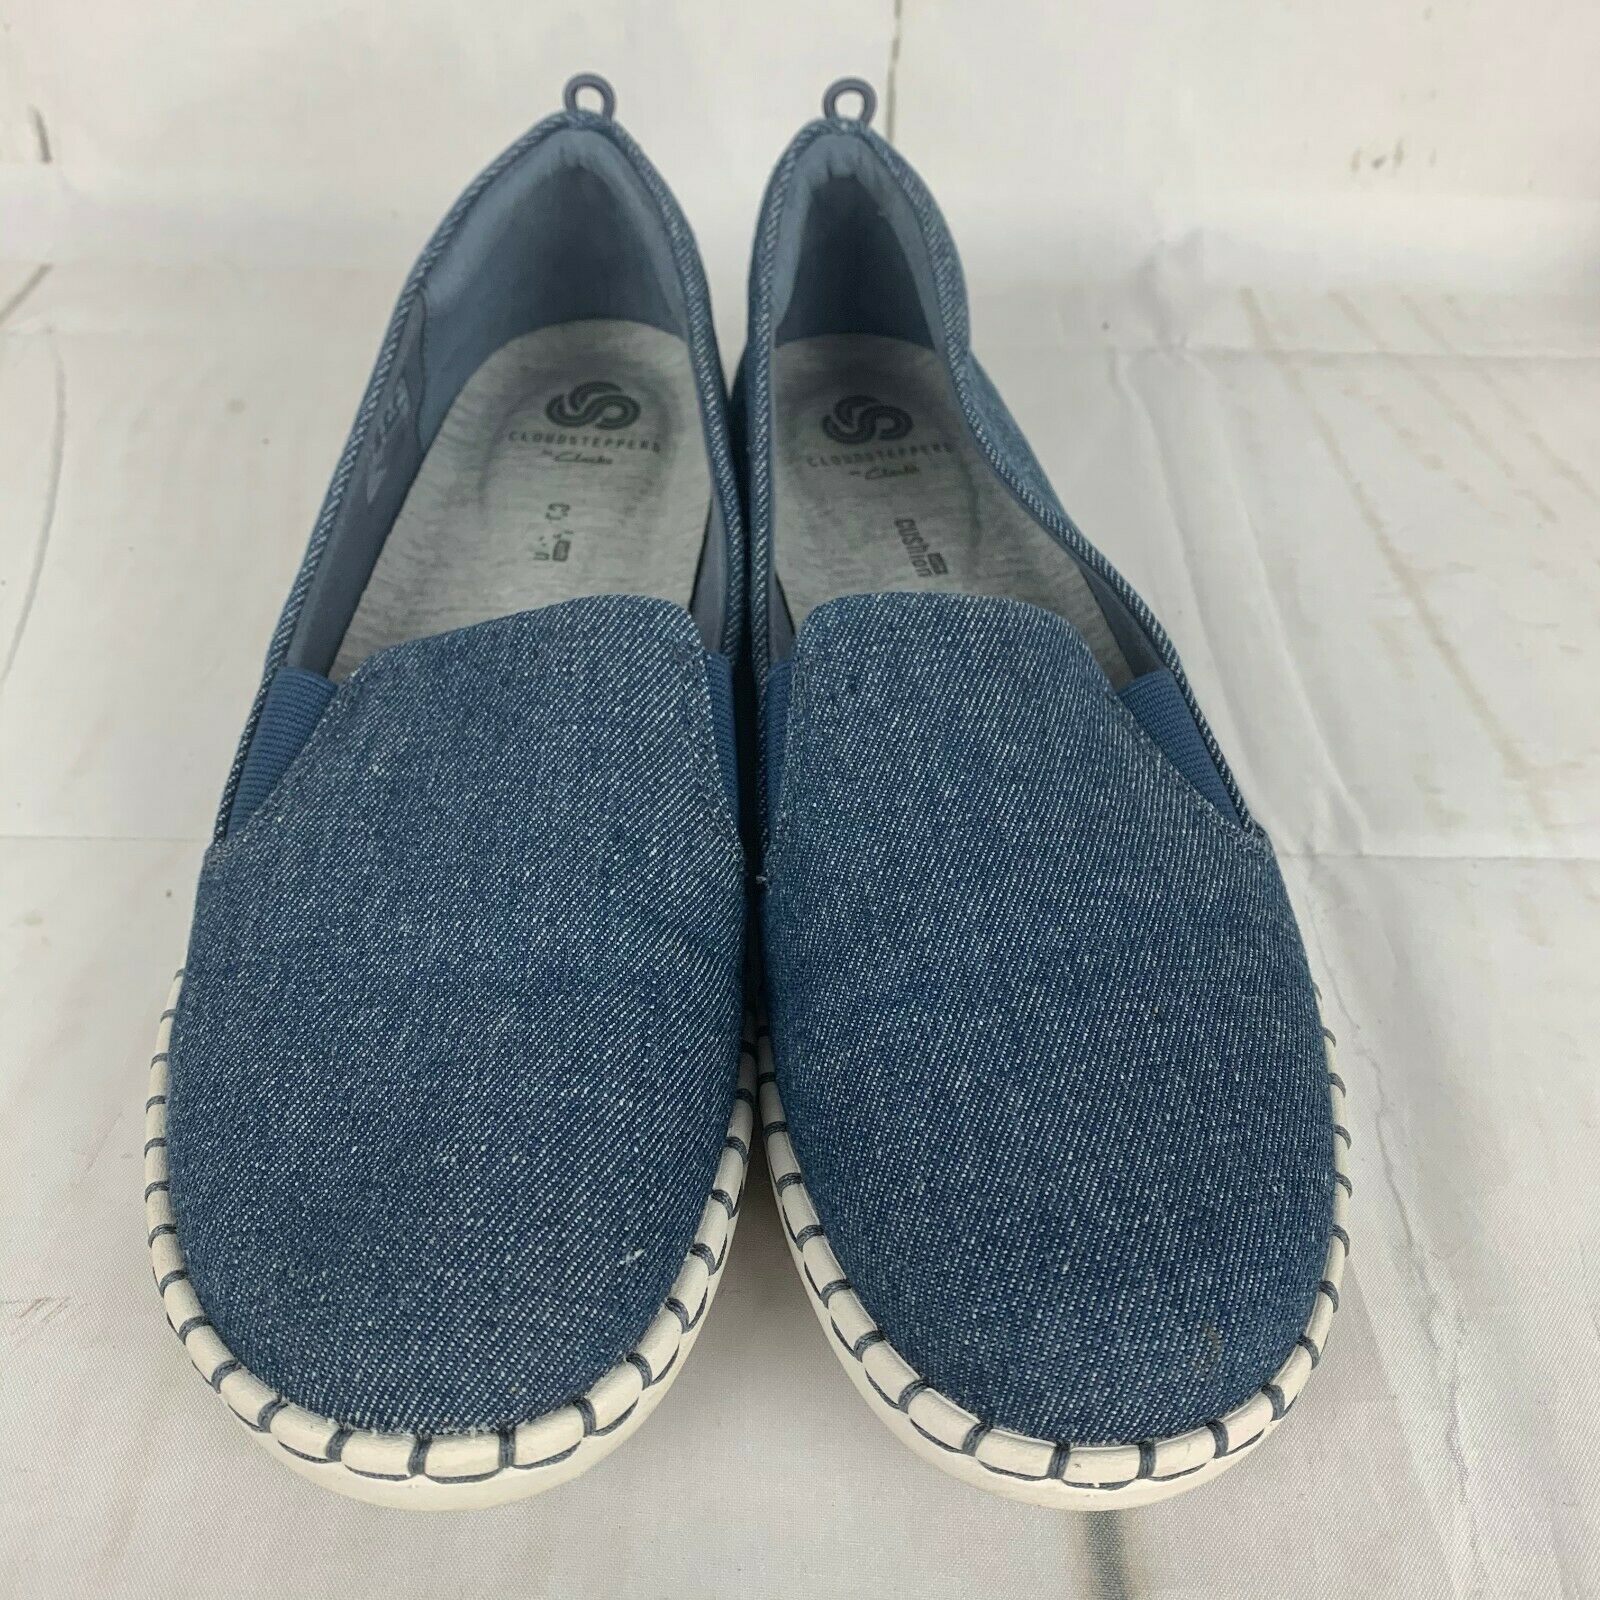 Clarks Cloudsteppers Women's Size 10 M Step Glow Denim Slip On Shoes ...